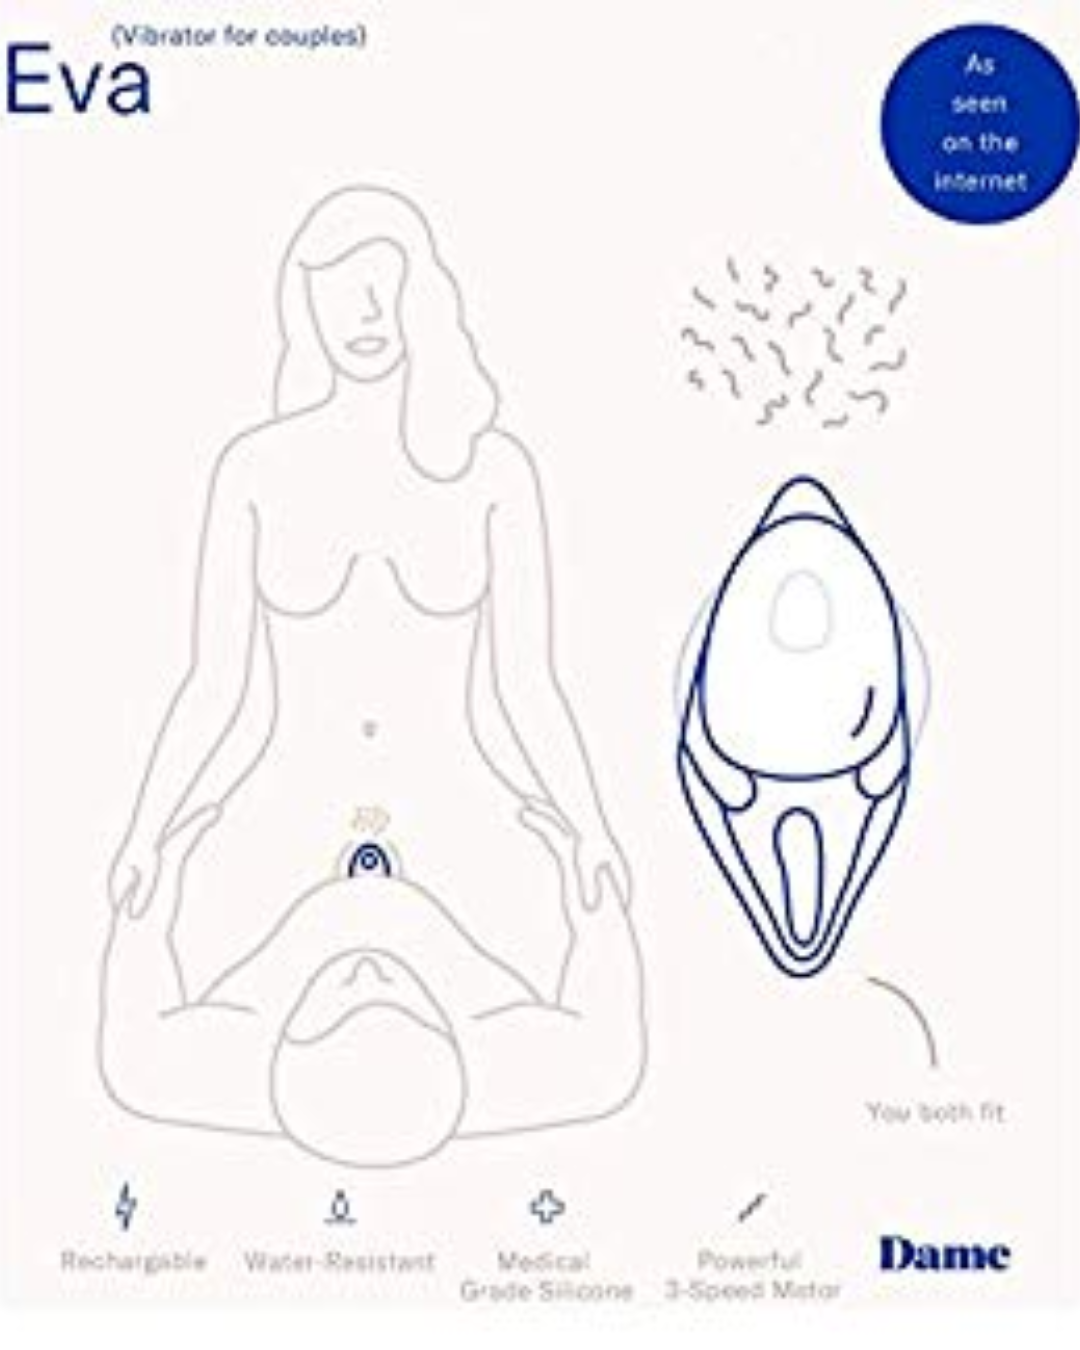 Eva II Hands-Free Silicone Rechargeable Clitoral Vibrator by Dame - Fir Green how to use diagram